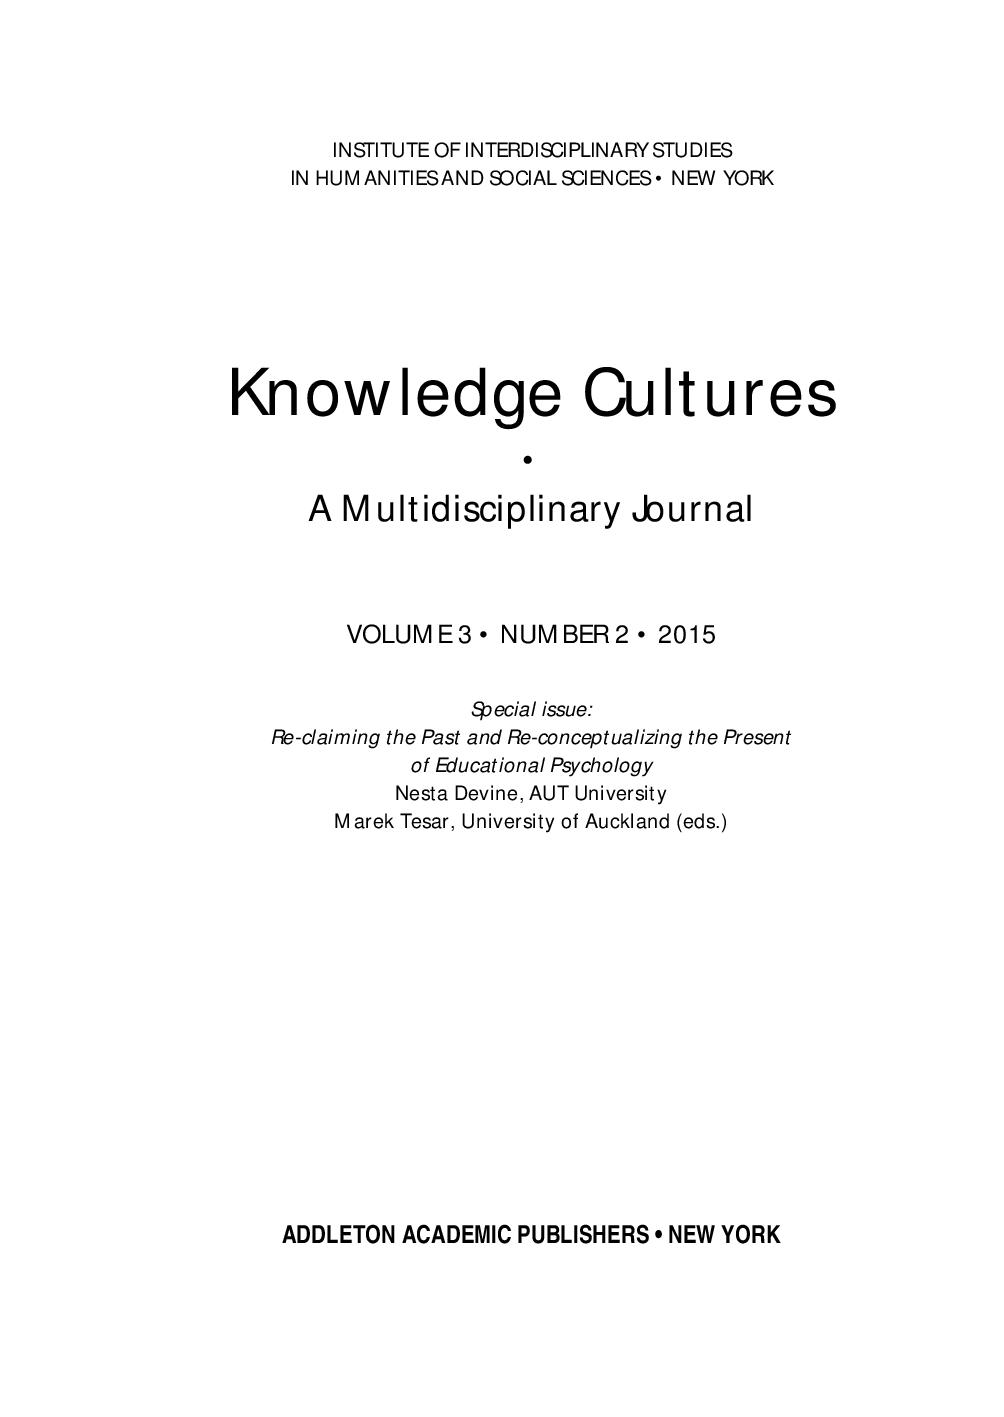 ANALYZING HISTORICAL PATTERNS, EXAMINING CURRENT TRENDS, AND FORECASTING CHANGE IN THE FIELD OF EDUCATIONAL PSYCHOLOGY: A CROSS-CULTURAL PERSPECTIVE Cover Image